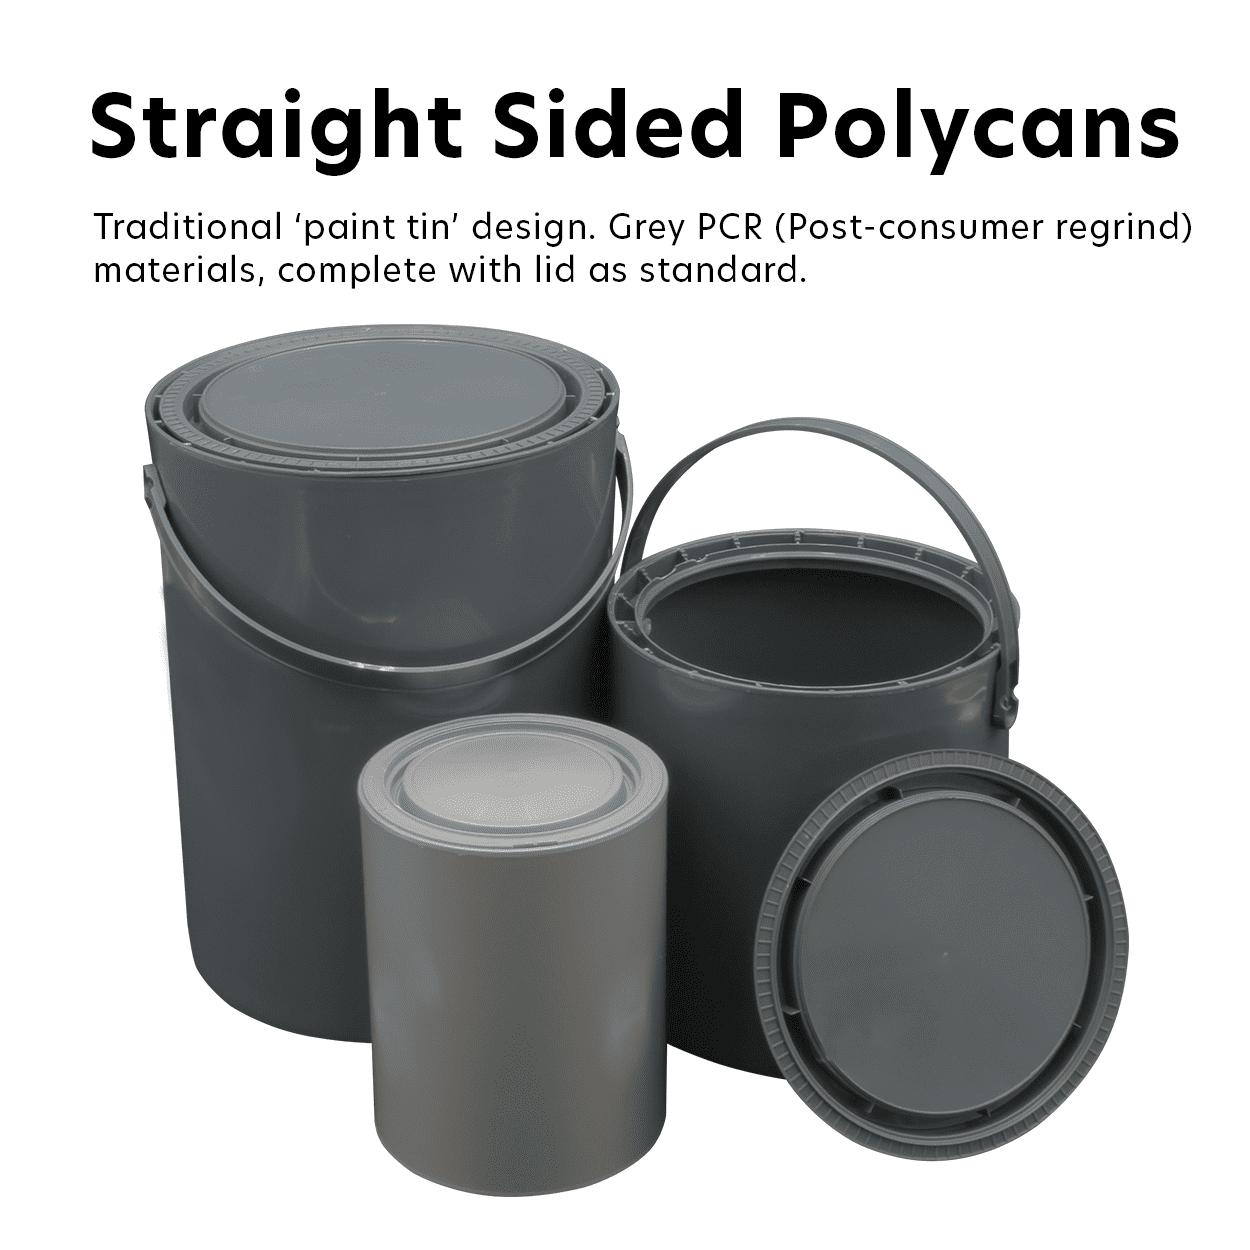 Straight Sided Polycans